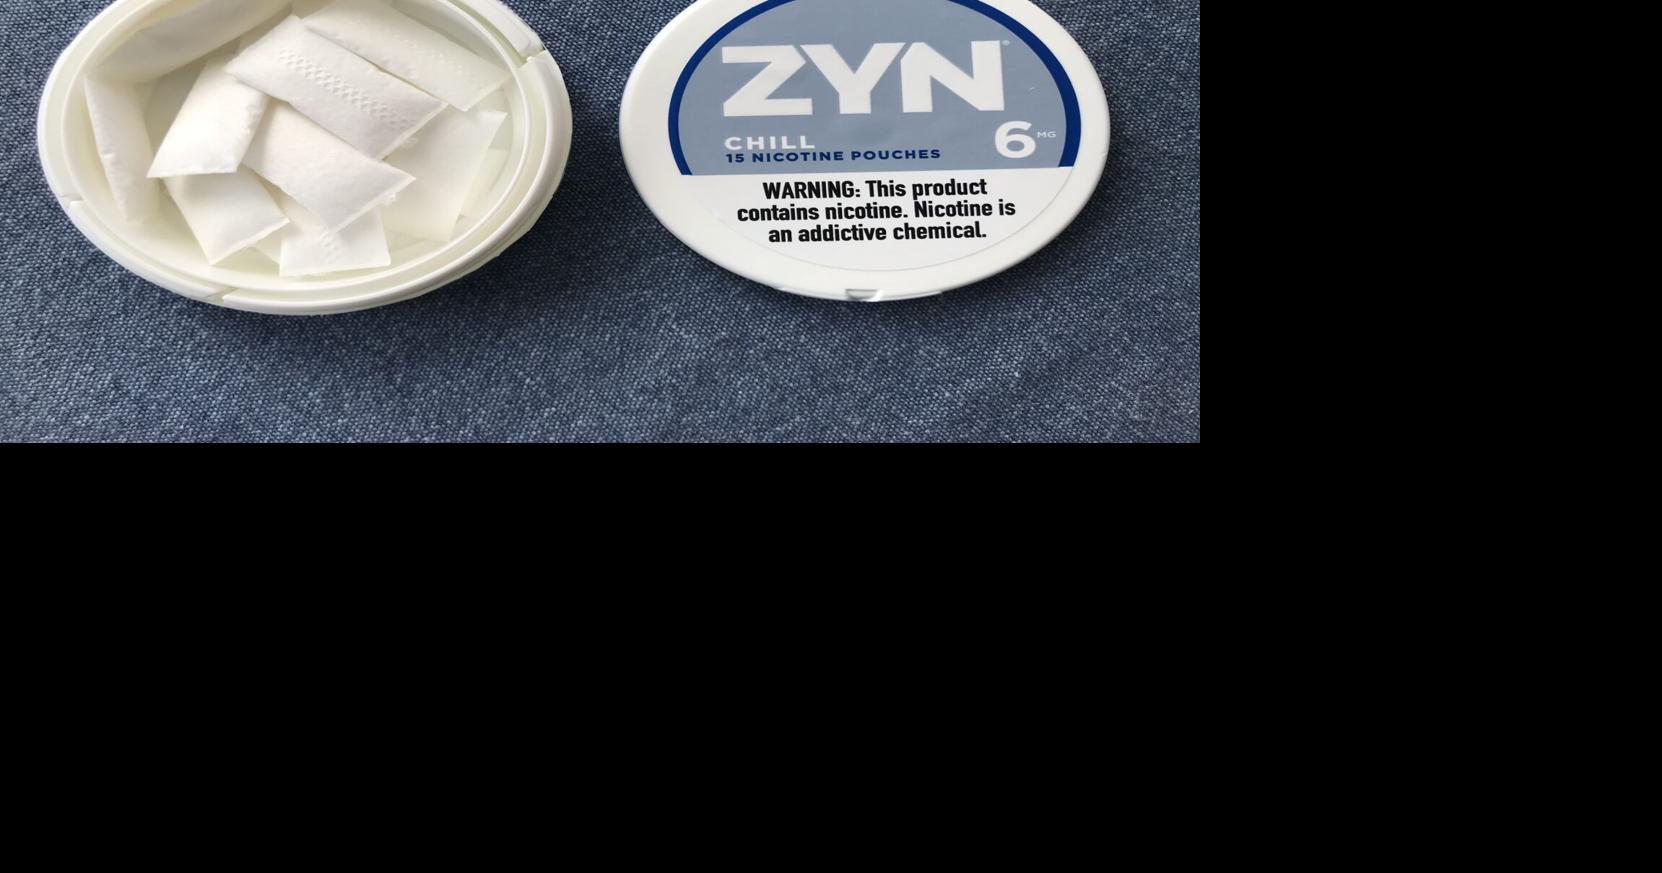 What are Zyn nicotine pouches?, News